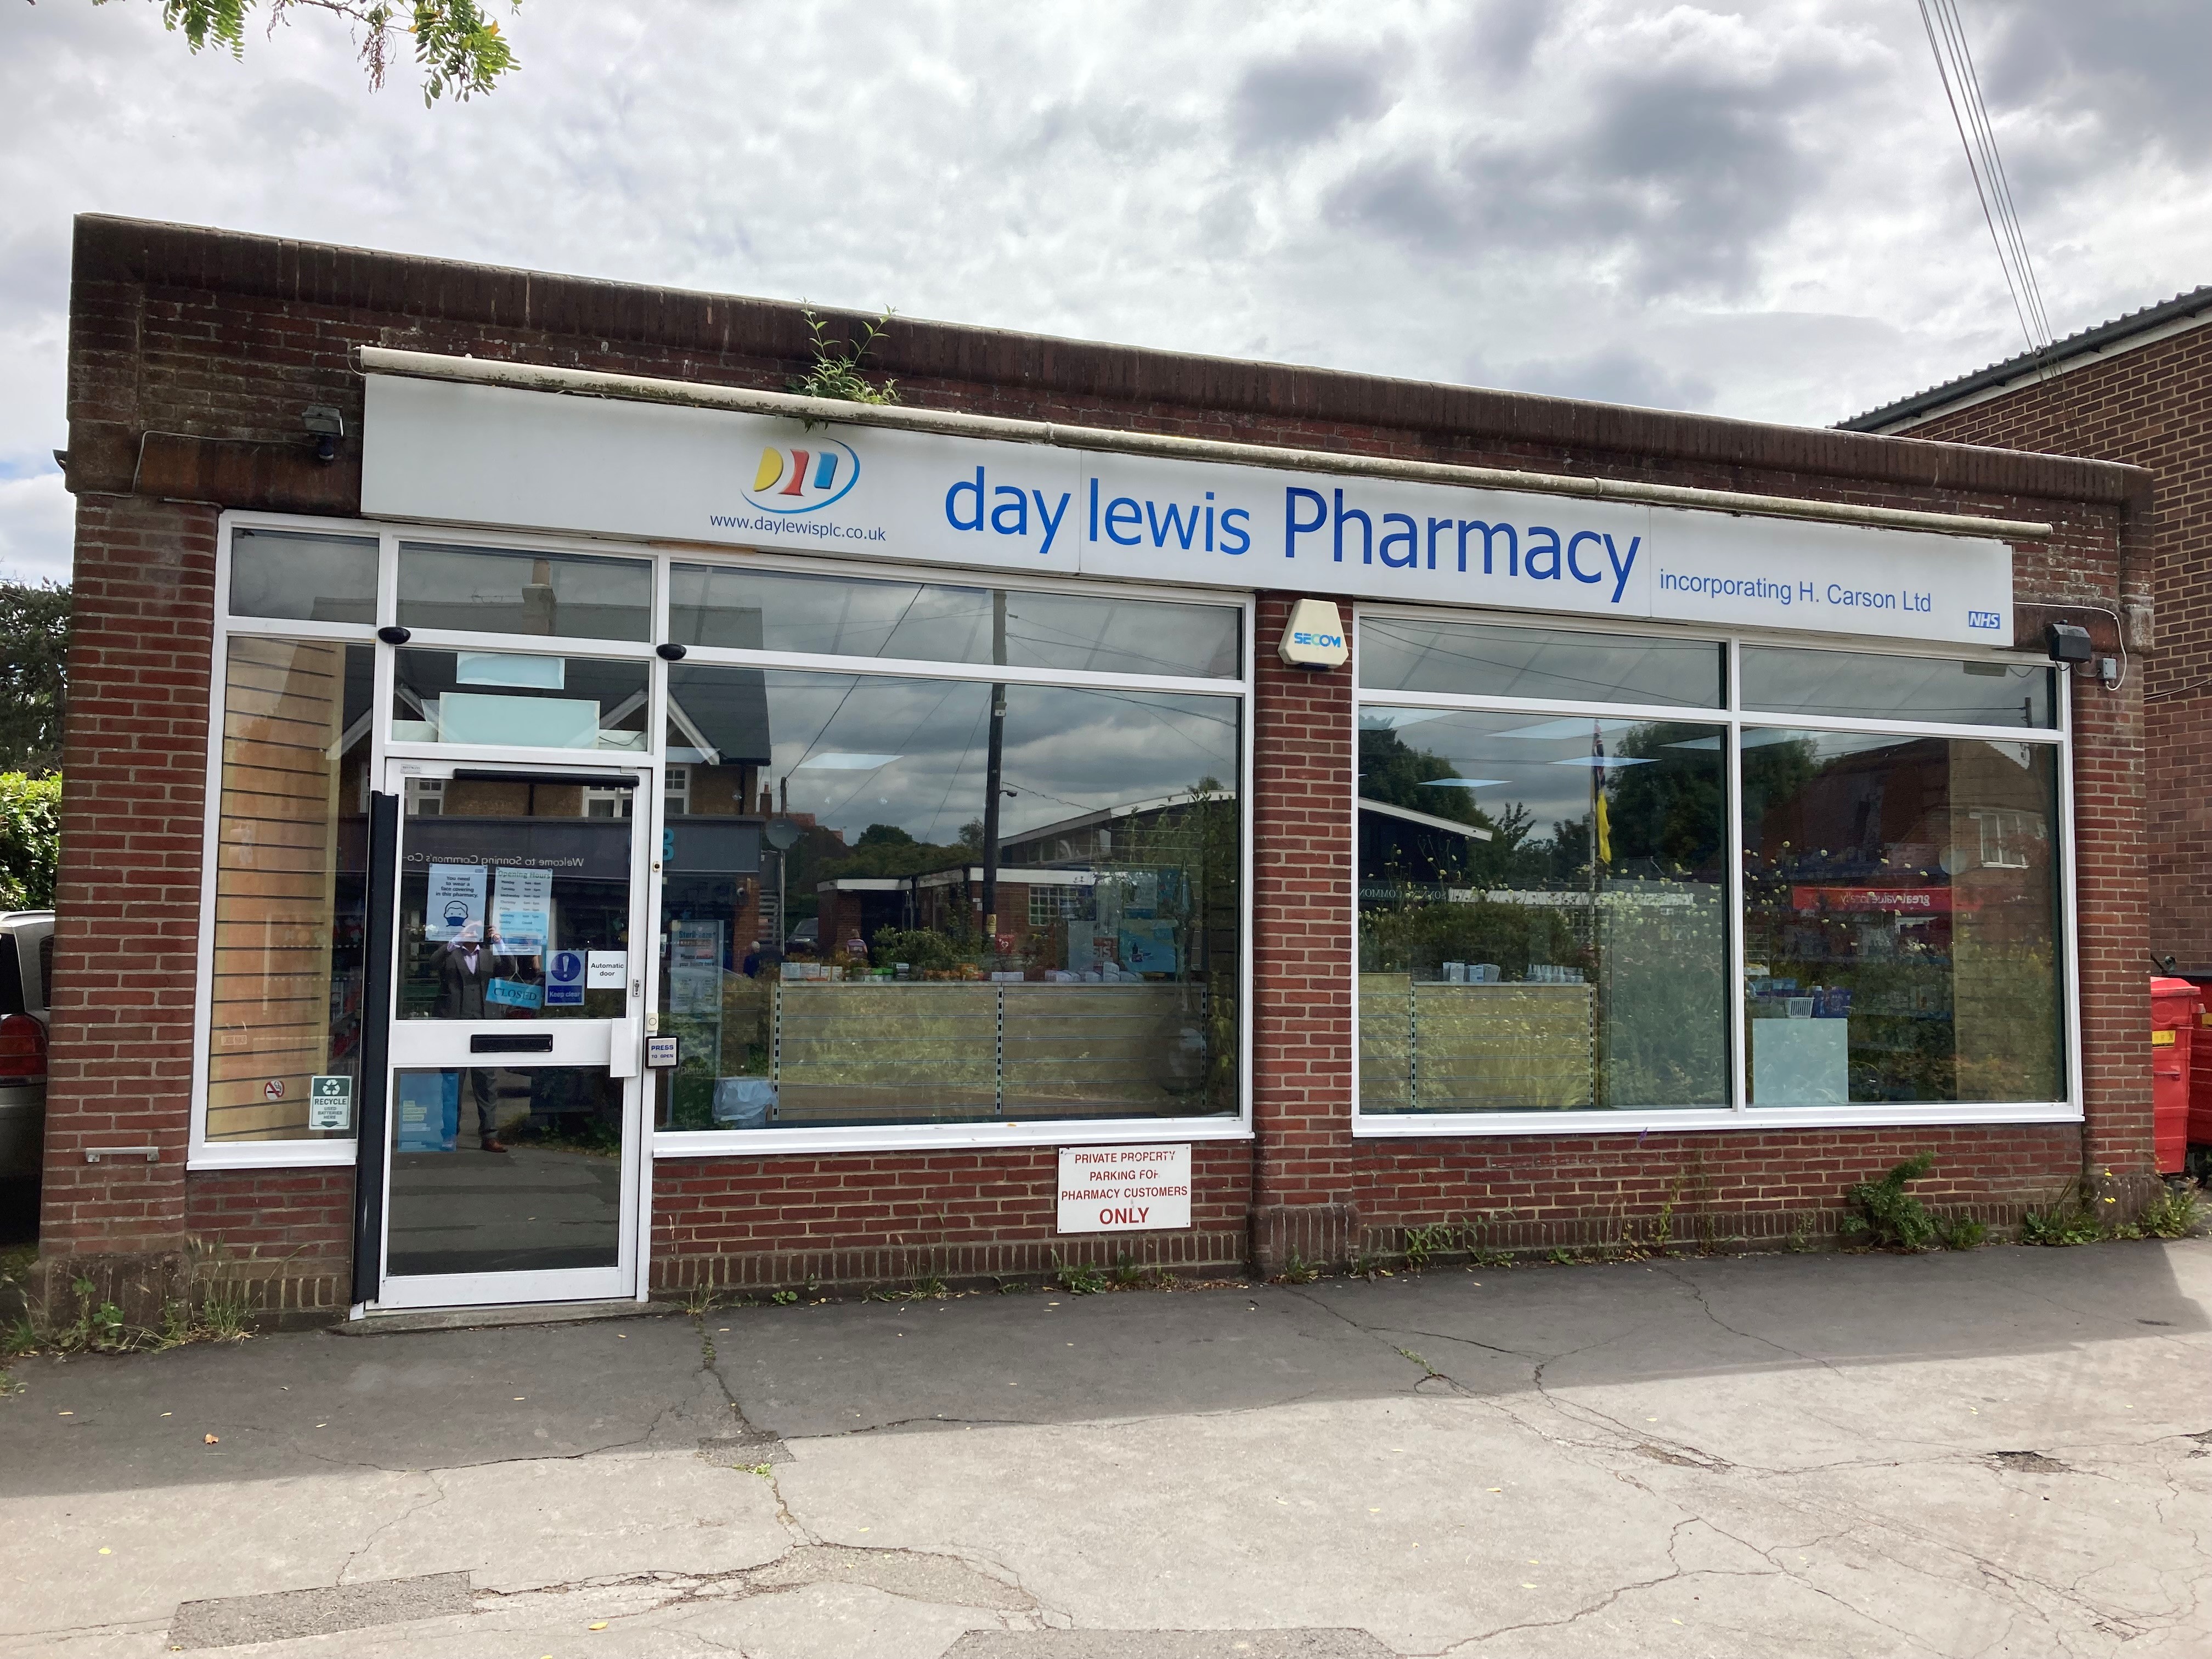 Images Day Lewis Pharmacy Sonning Common